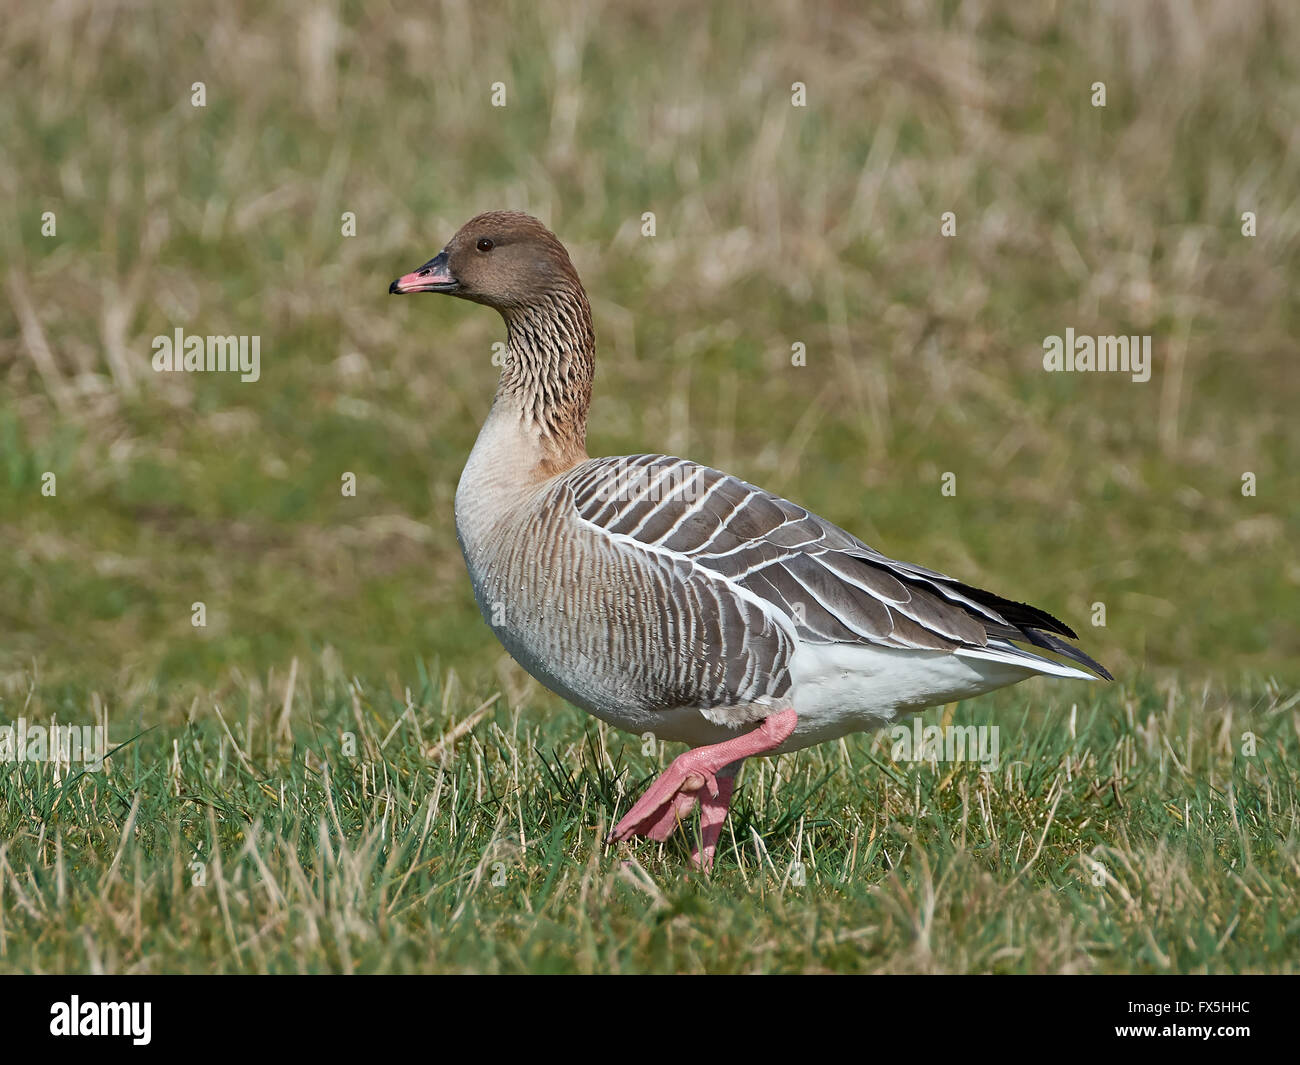 Pink-footed goose walking on the ground in its habitat Stock Photo